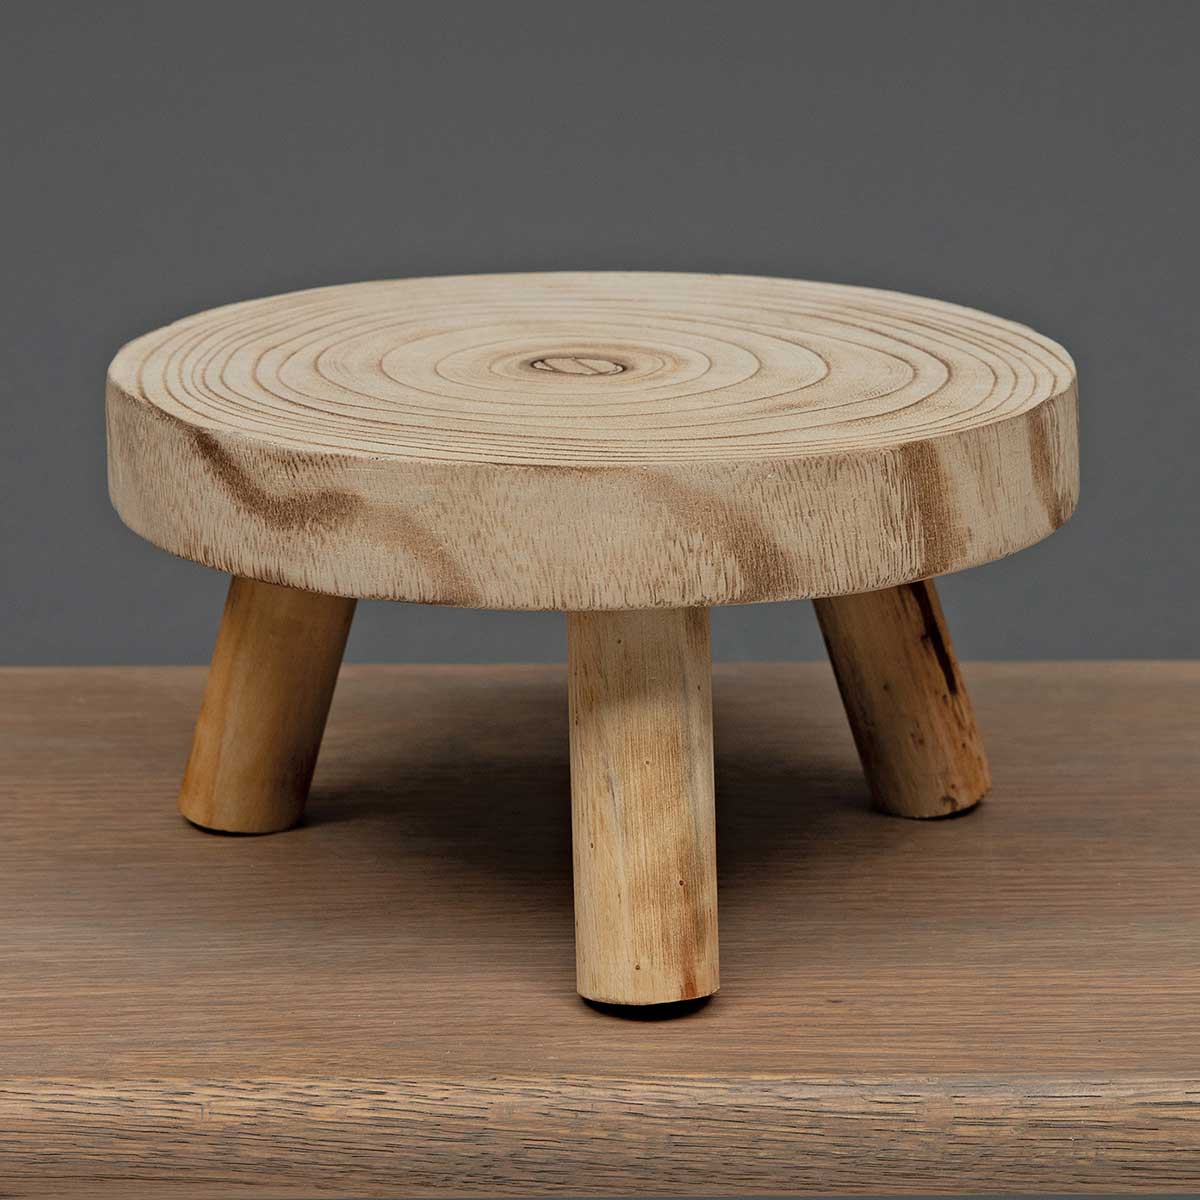 WOOD ROUND PEDESTAL NATURAL WITH 3 LEGS 8.5"X4.5" - Click Image to Close